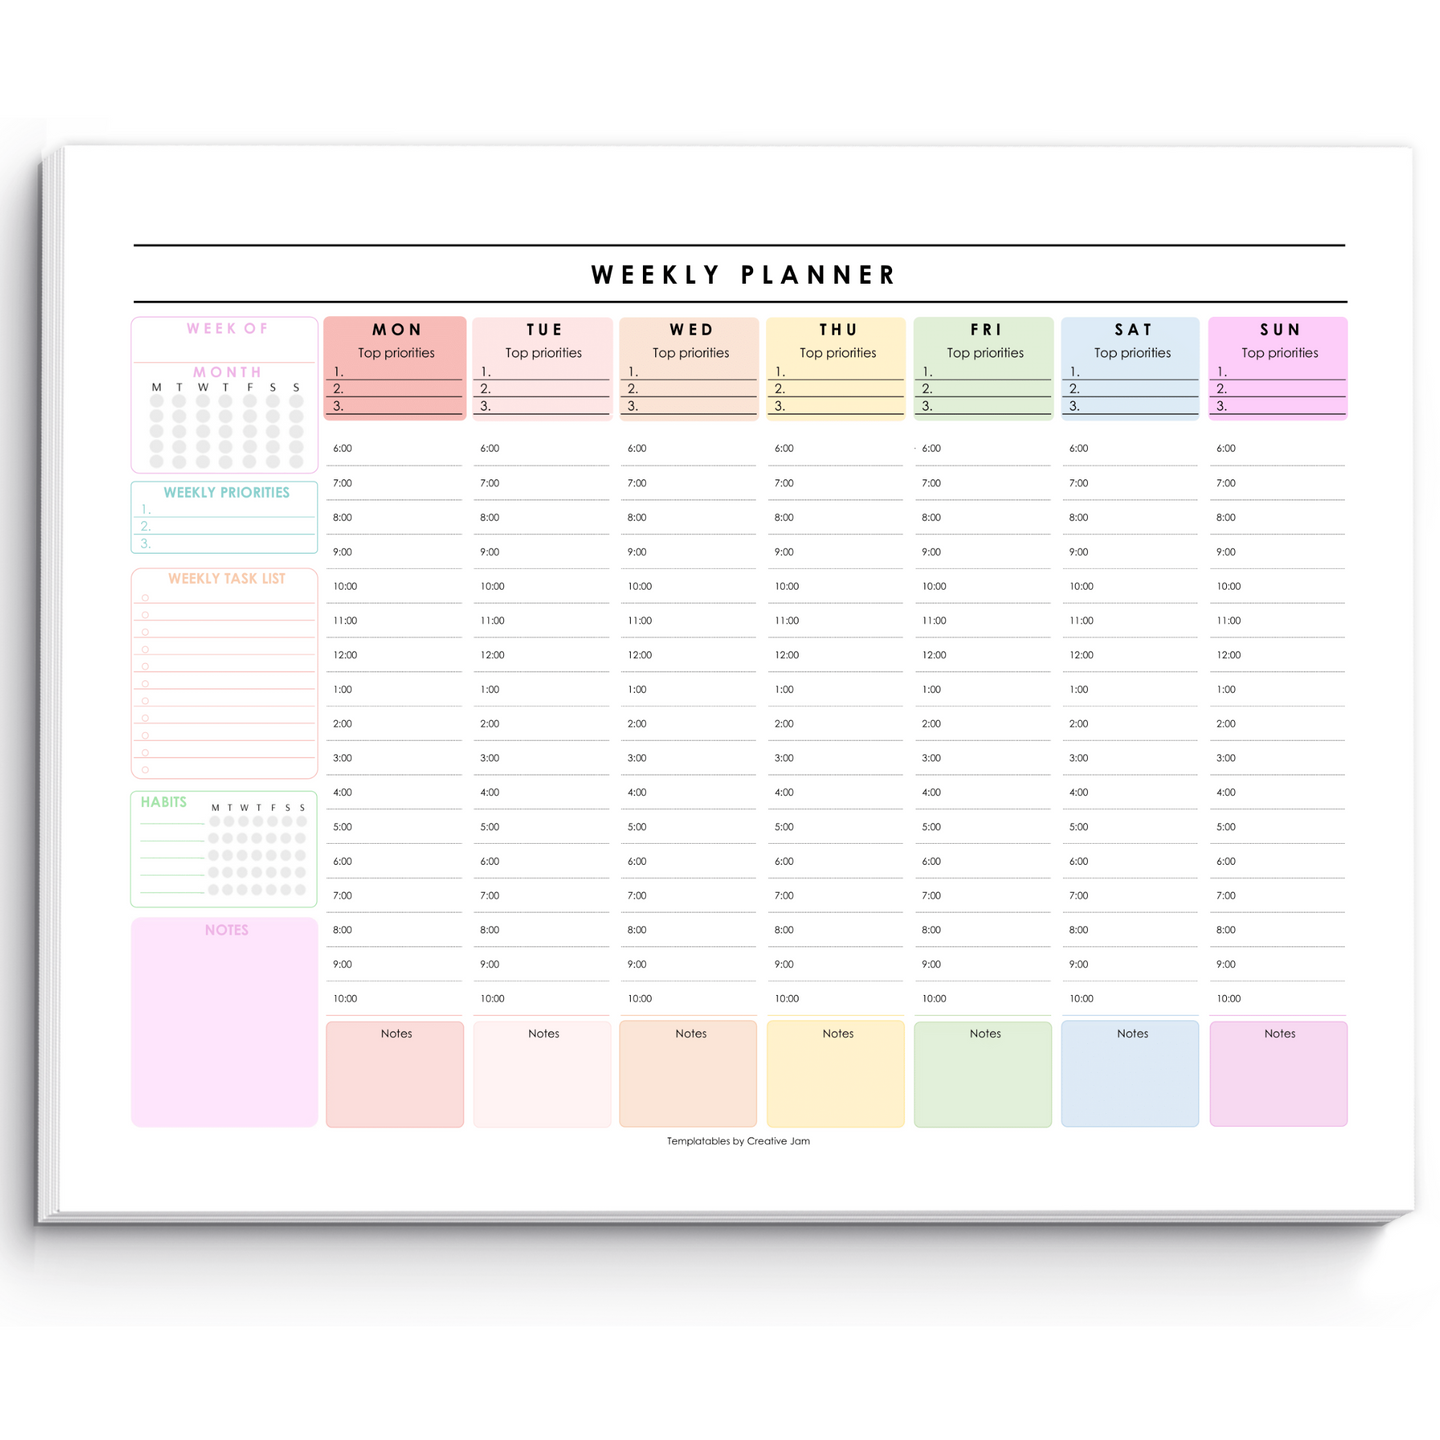 Weekly Hourly Planner Notepad, Daily Planner Desk Pad, Weekly Schedule, To Do List Note Pad, ADHD Planner | 50 Undated Tear Away Sheets A4 | Colorful